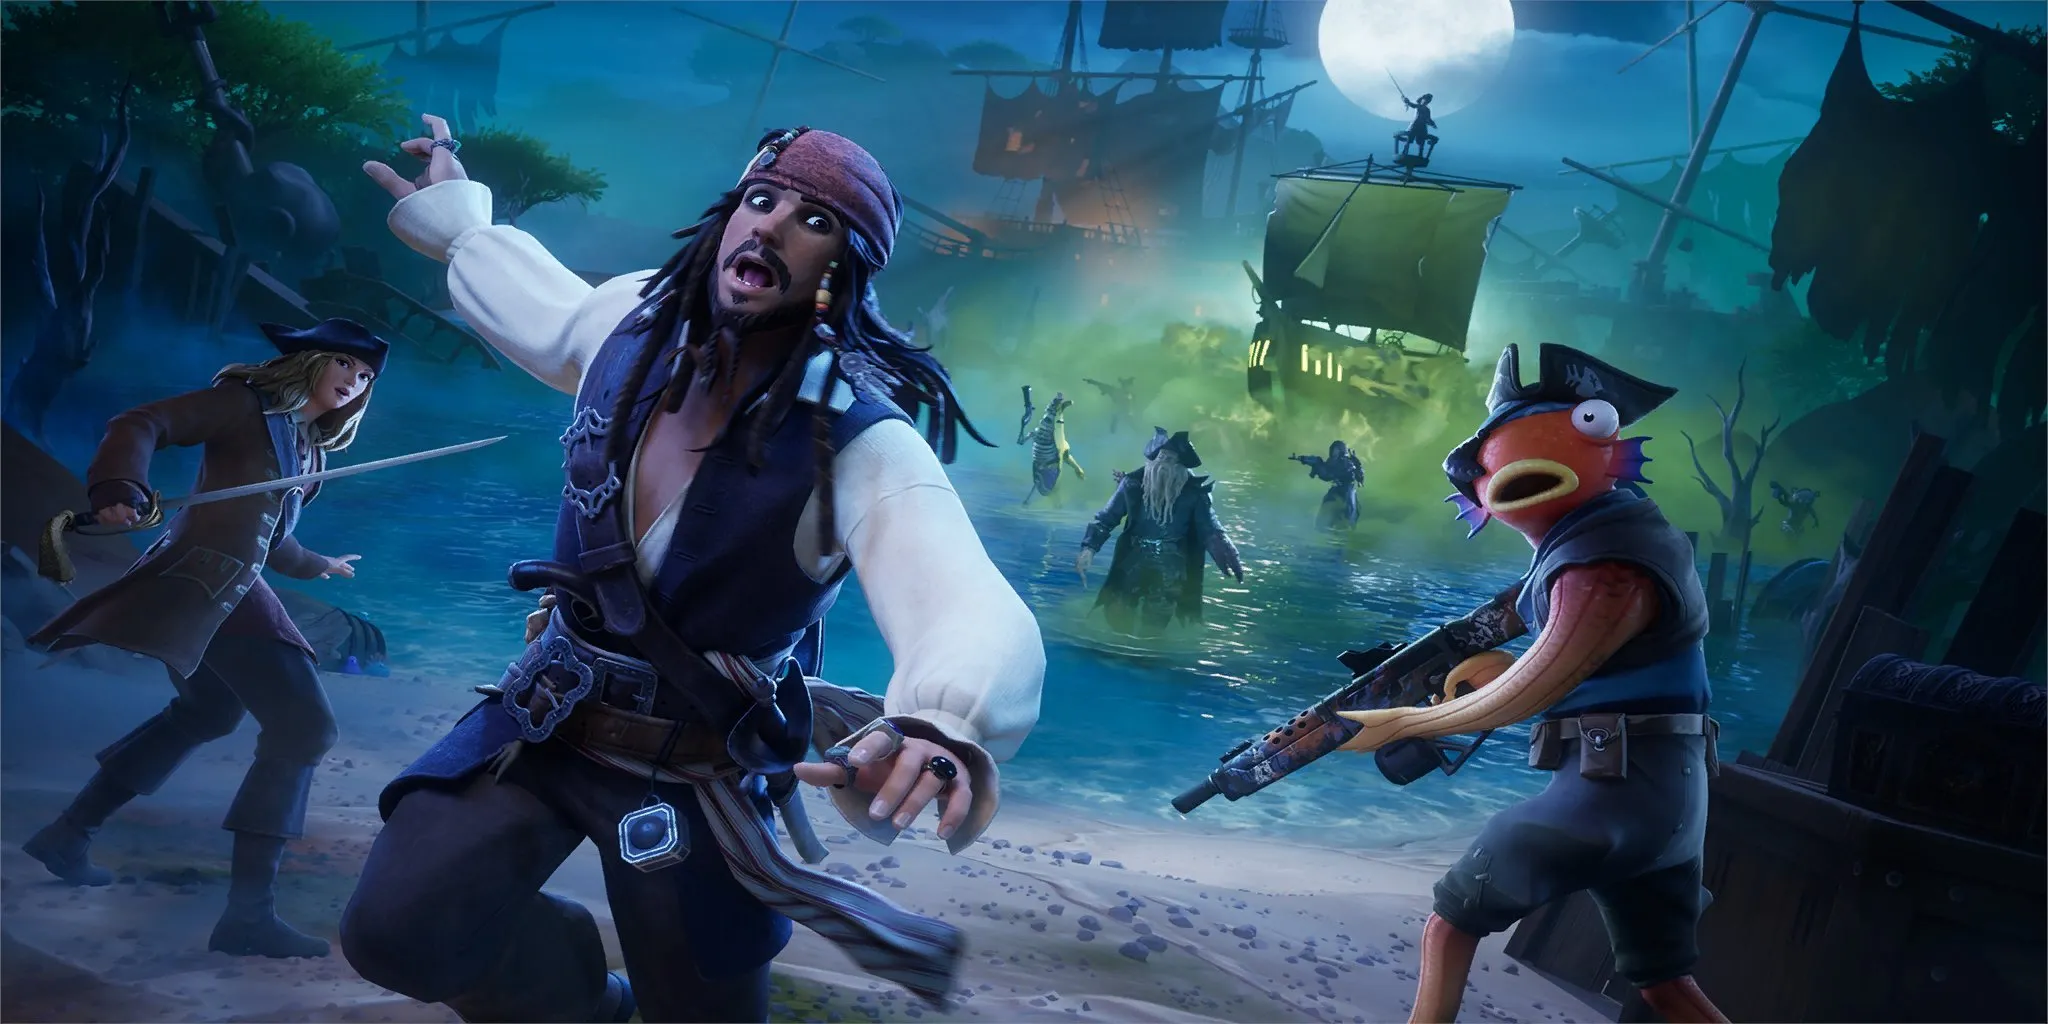 How to get the Jack Sparrow Fortnite skin